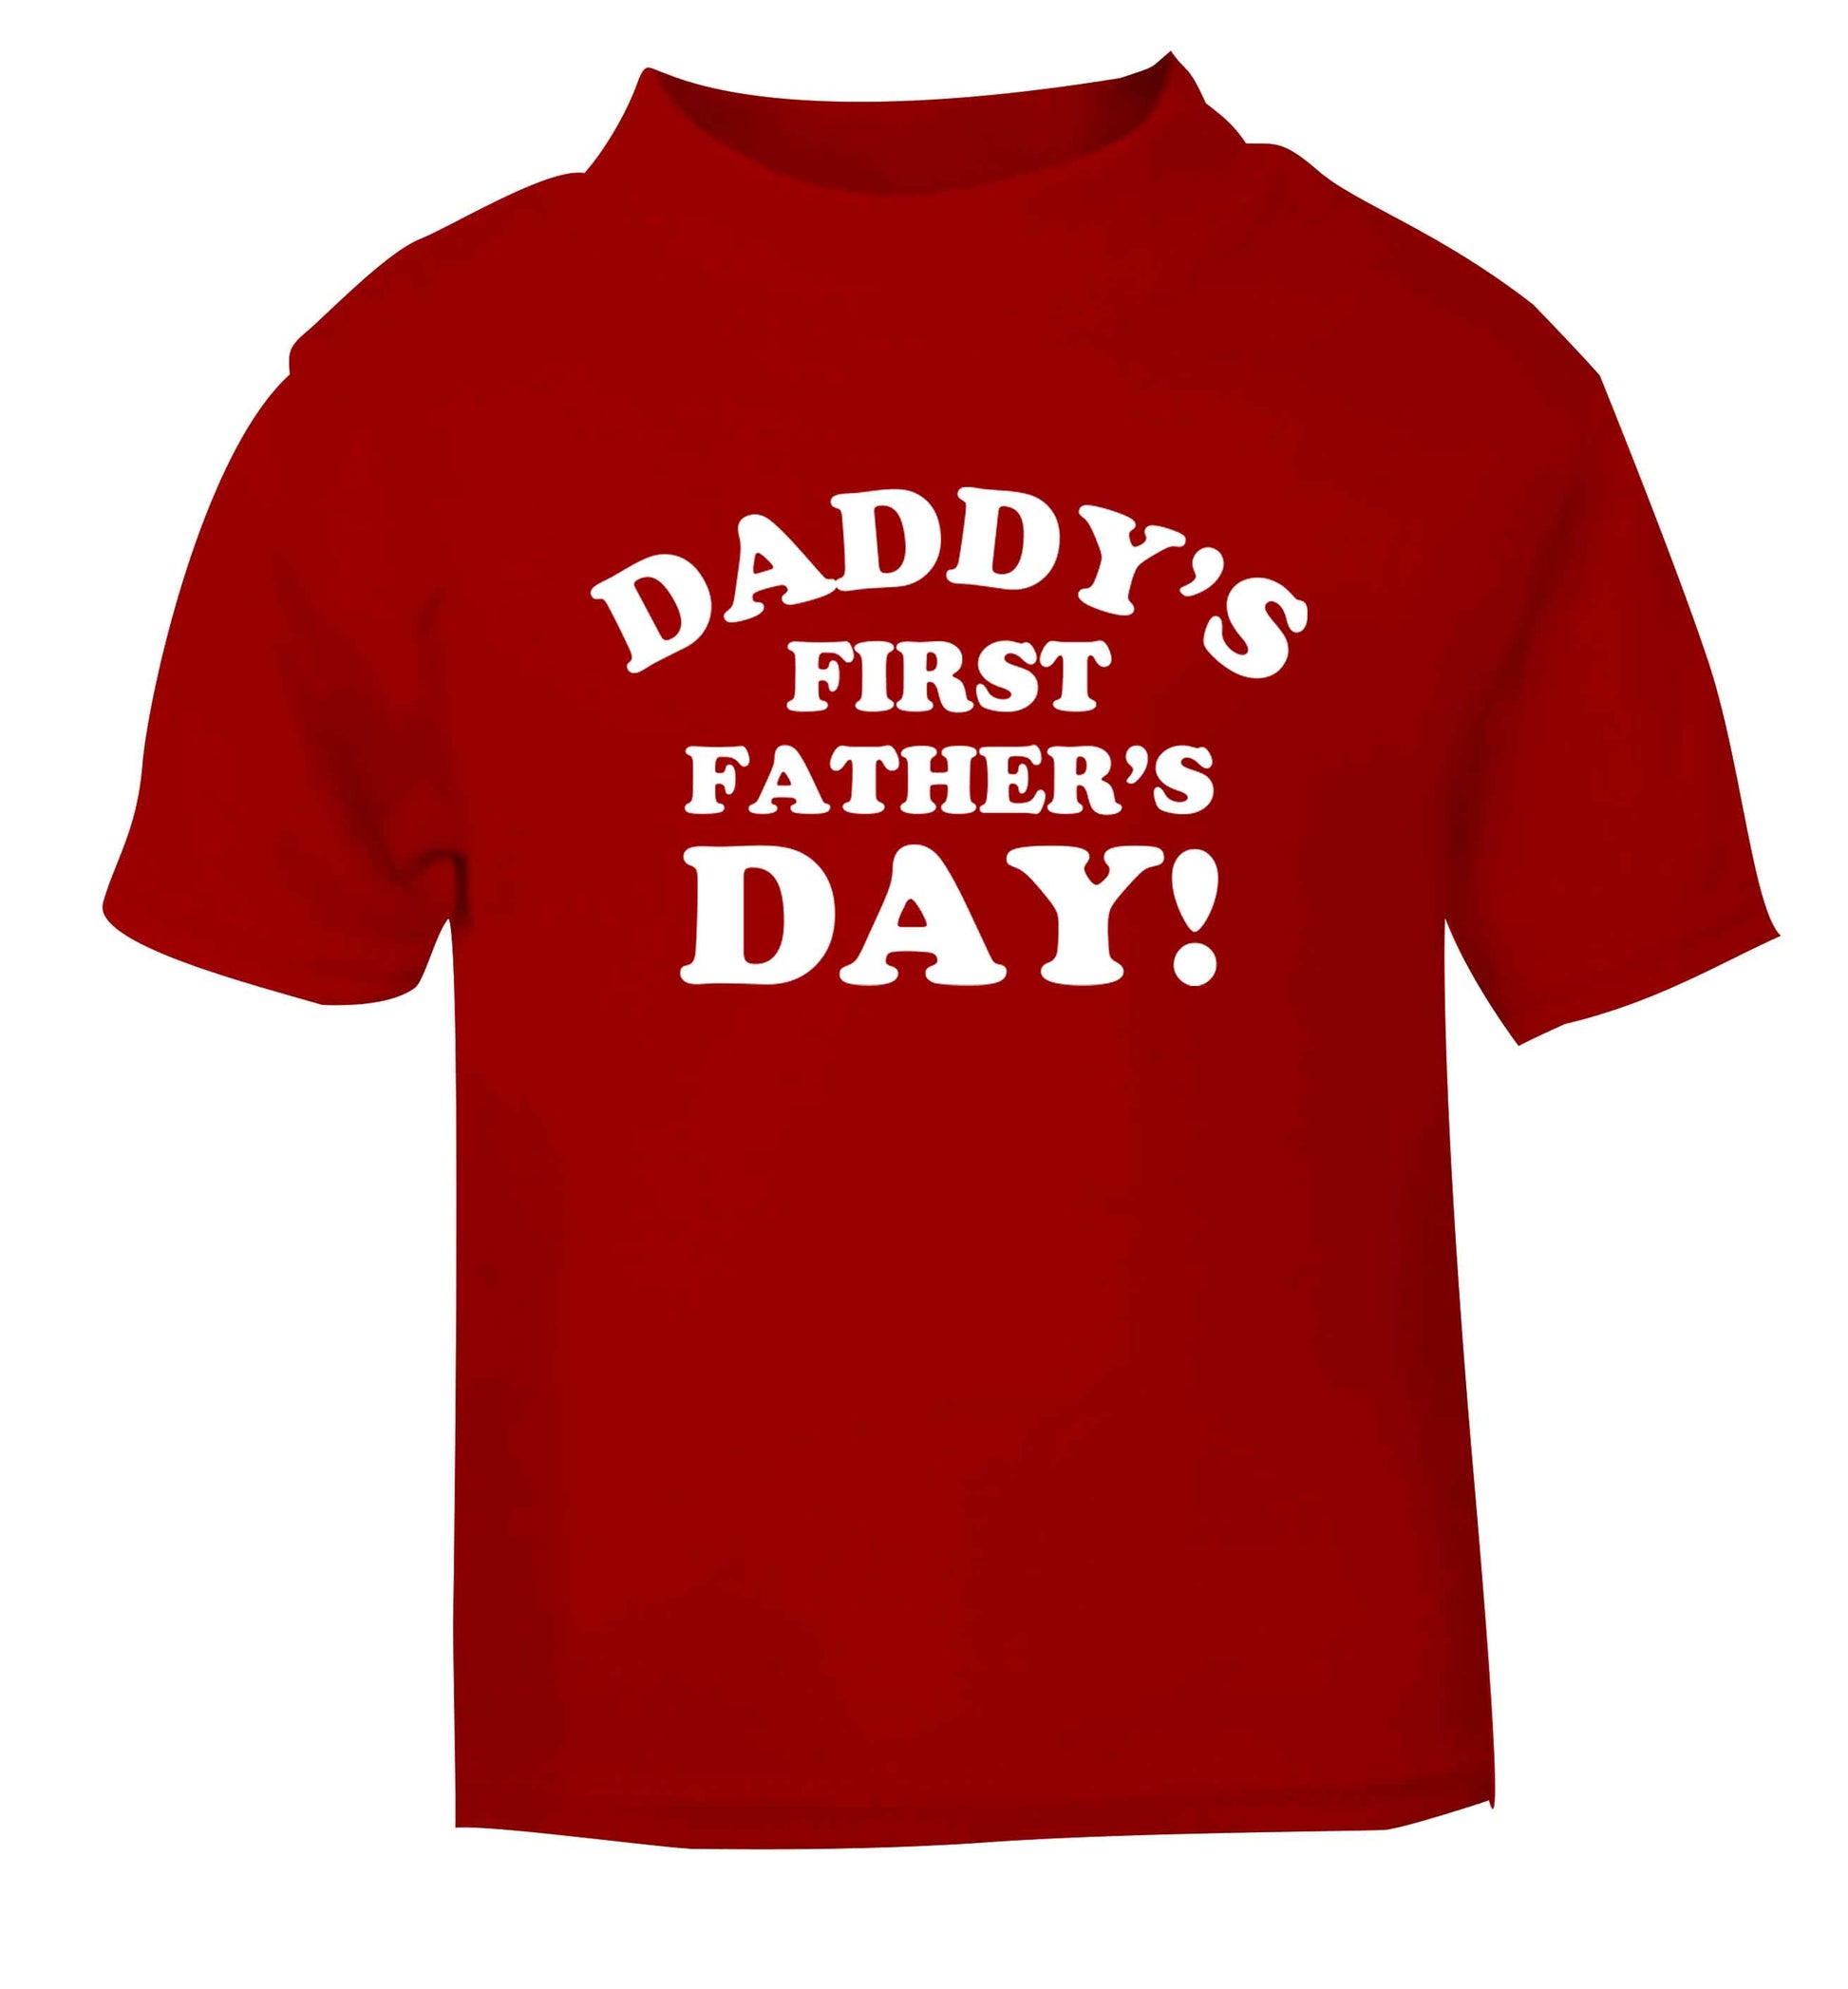 Daddy's first father's day red baby toddler Tshirt 2 Years